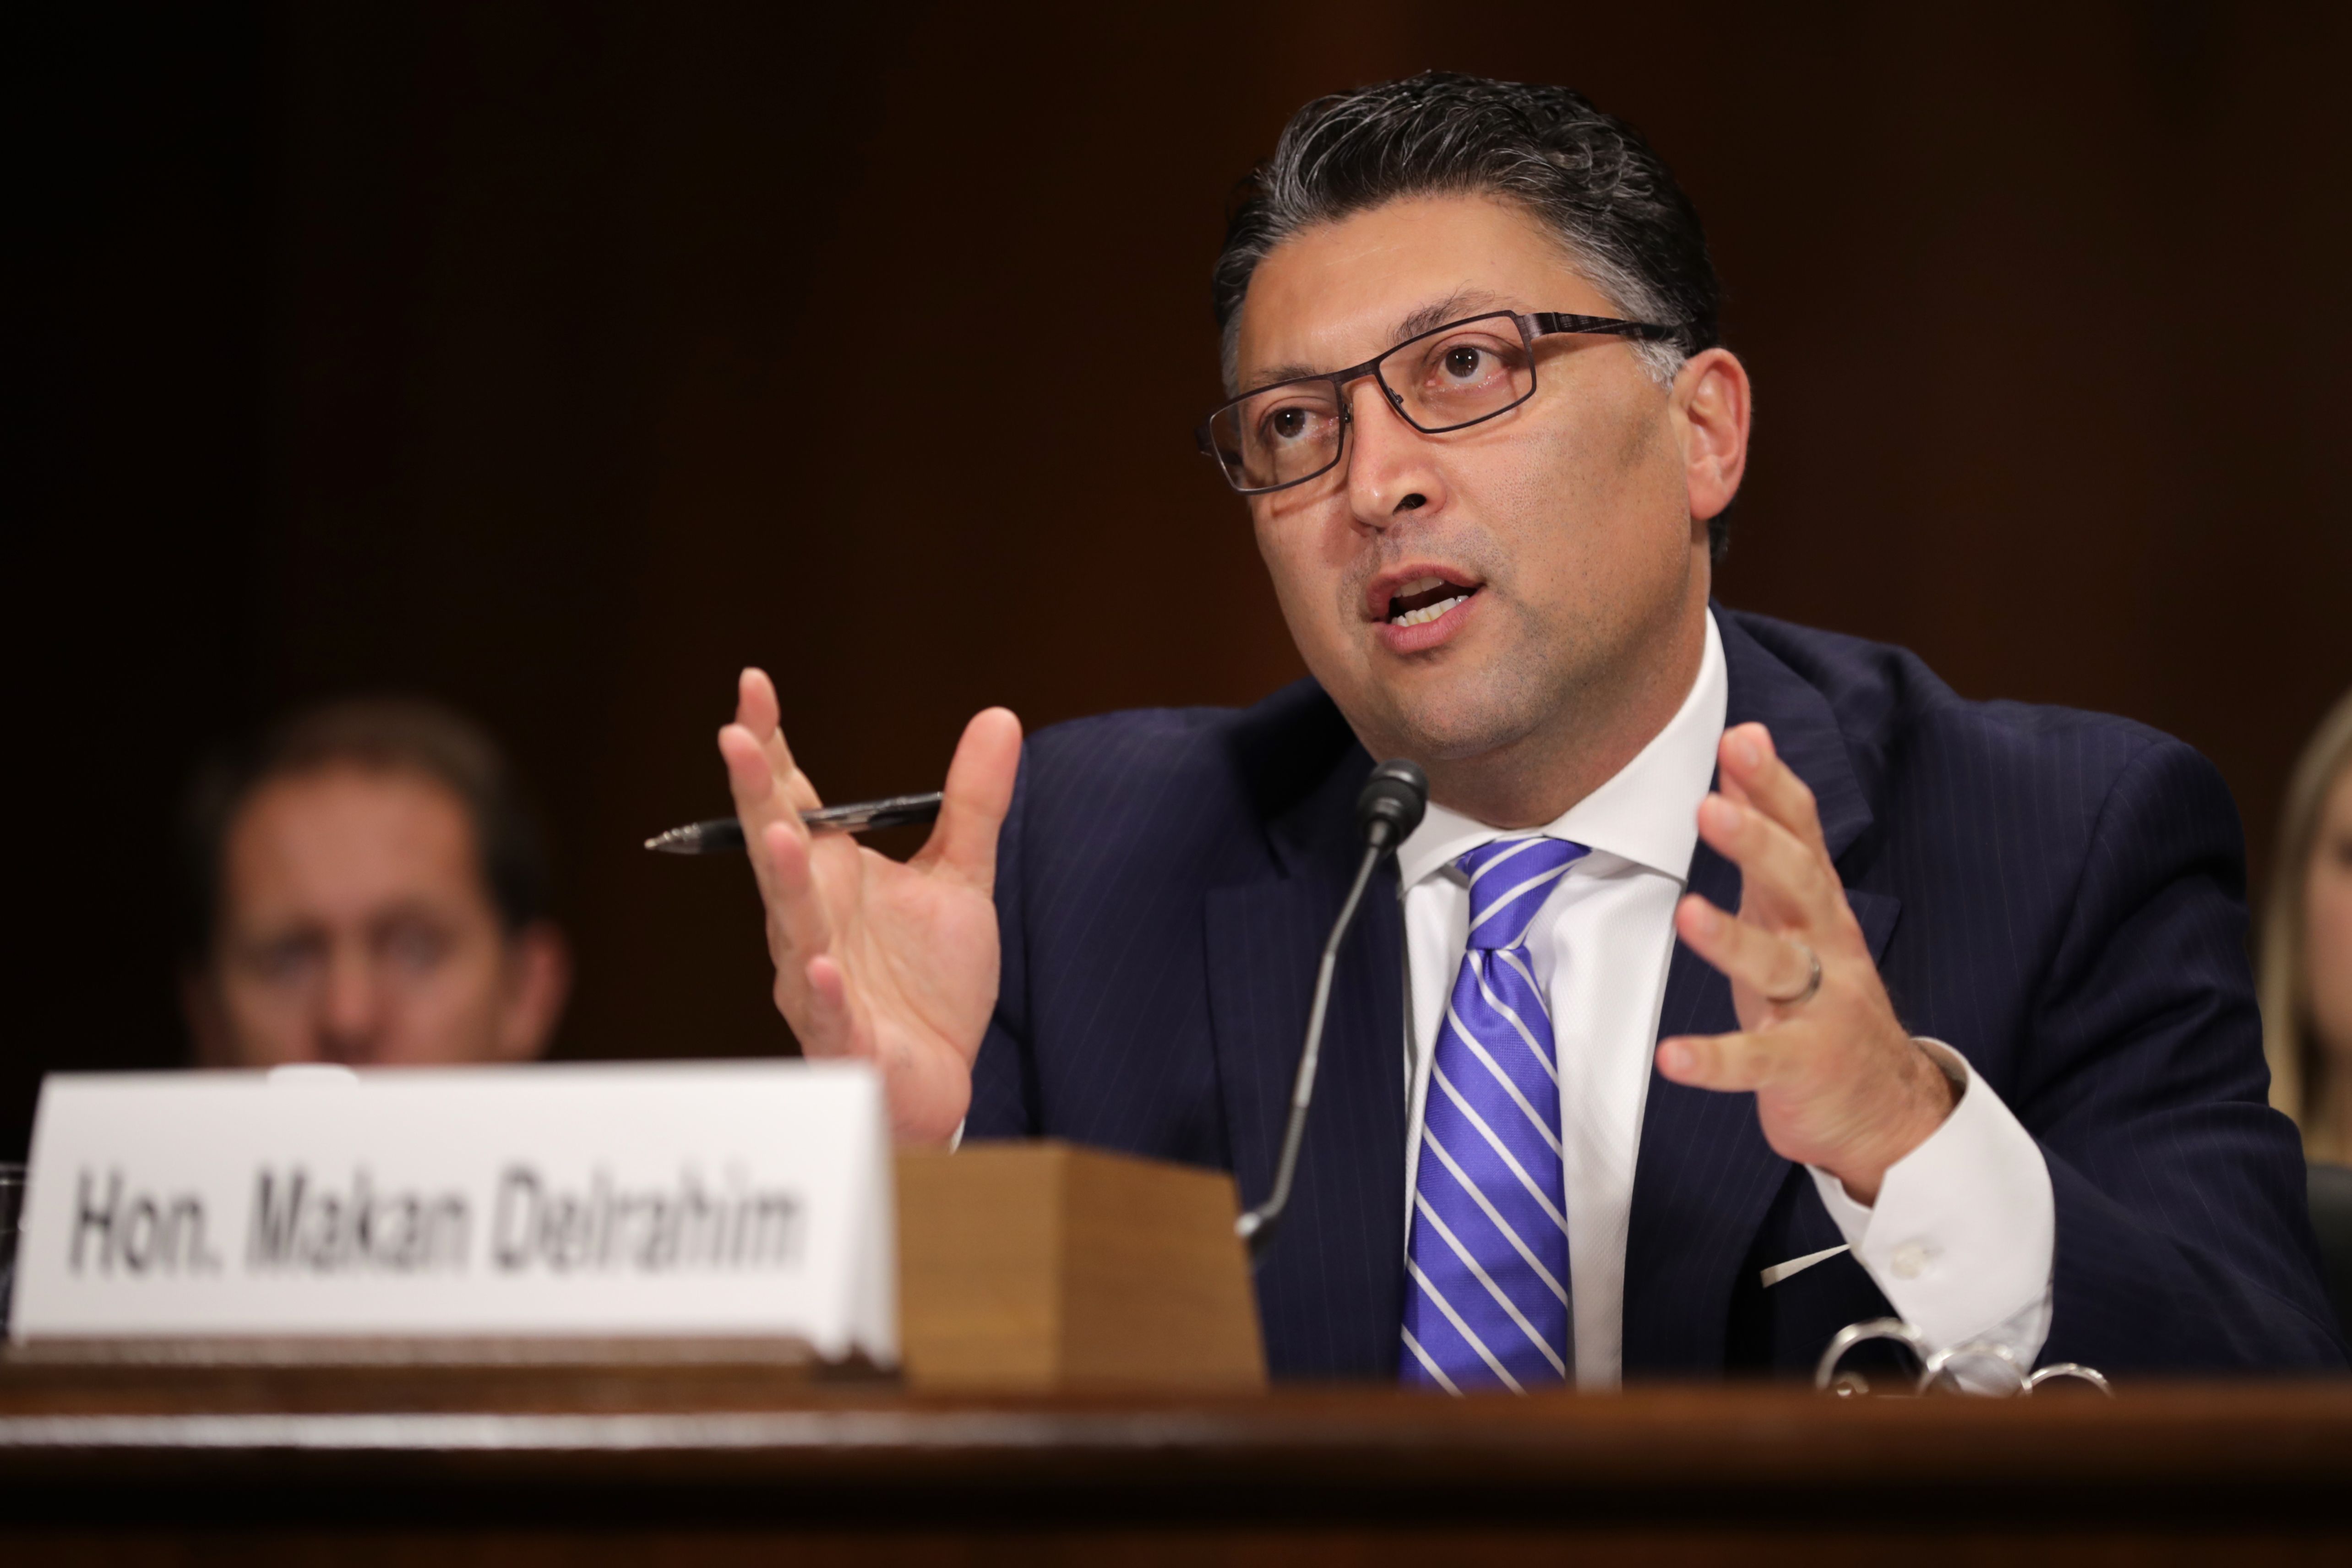 DOJ antitrust chief Makan Delrahim remains open to a T-Mobile-Sprint deal